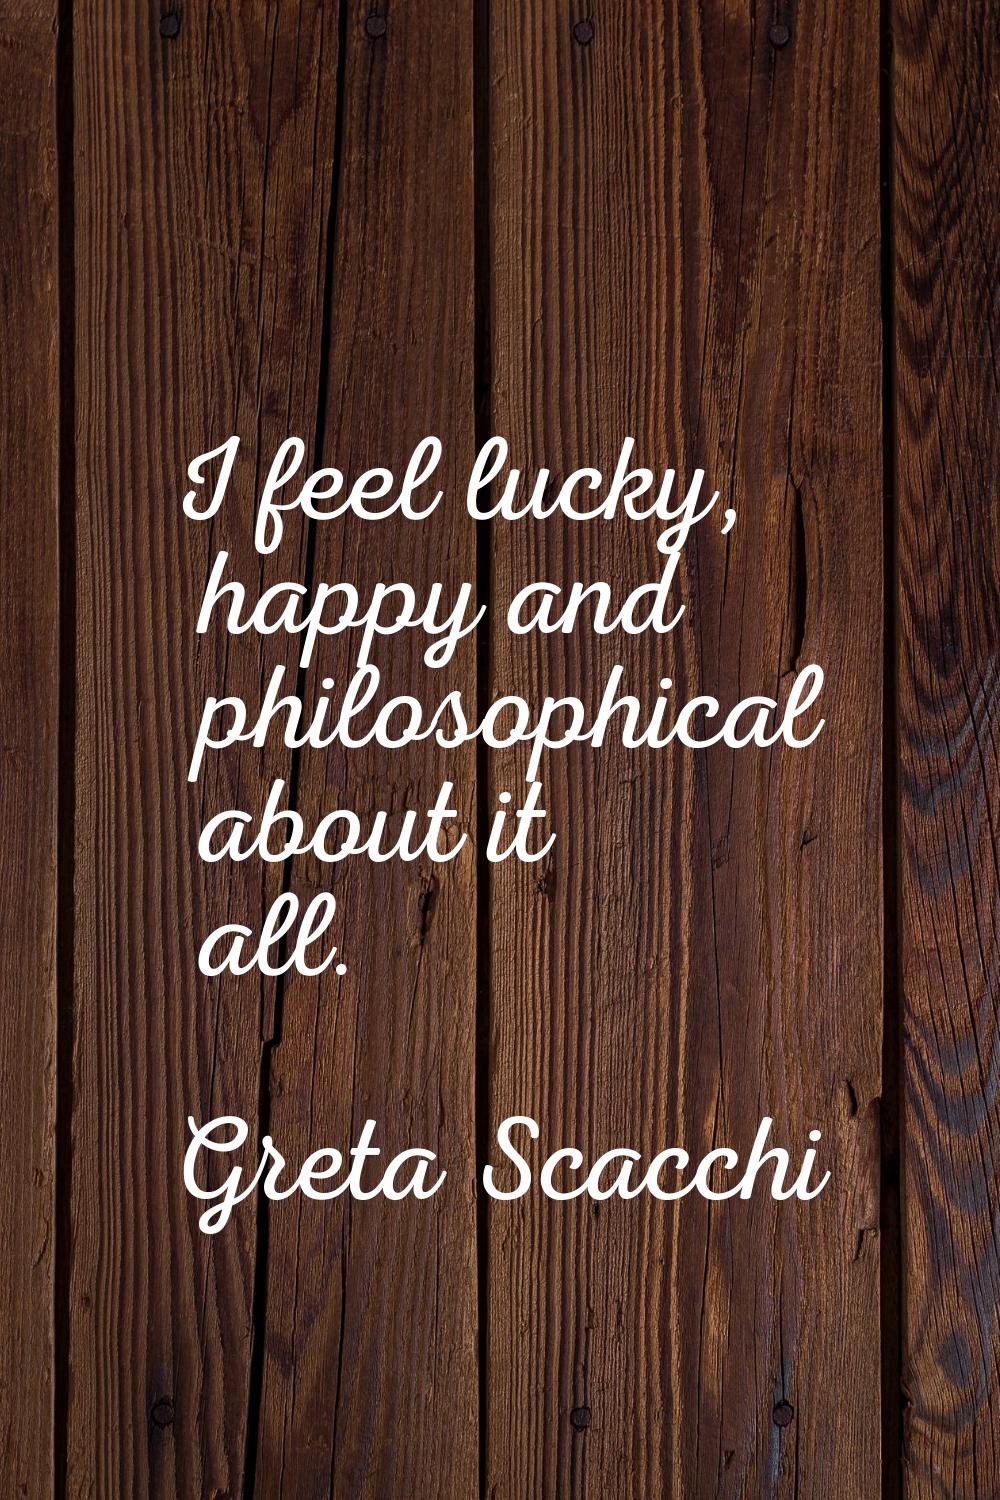 I feel lucky, happy and philosophical about it all.